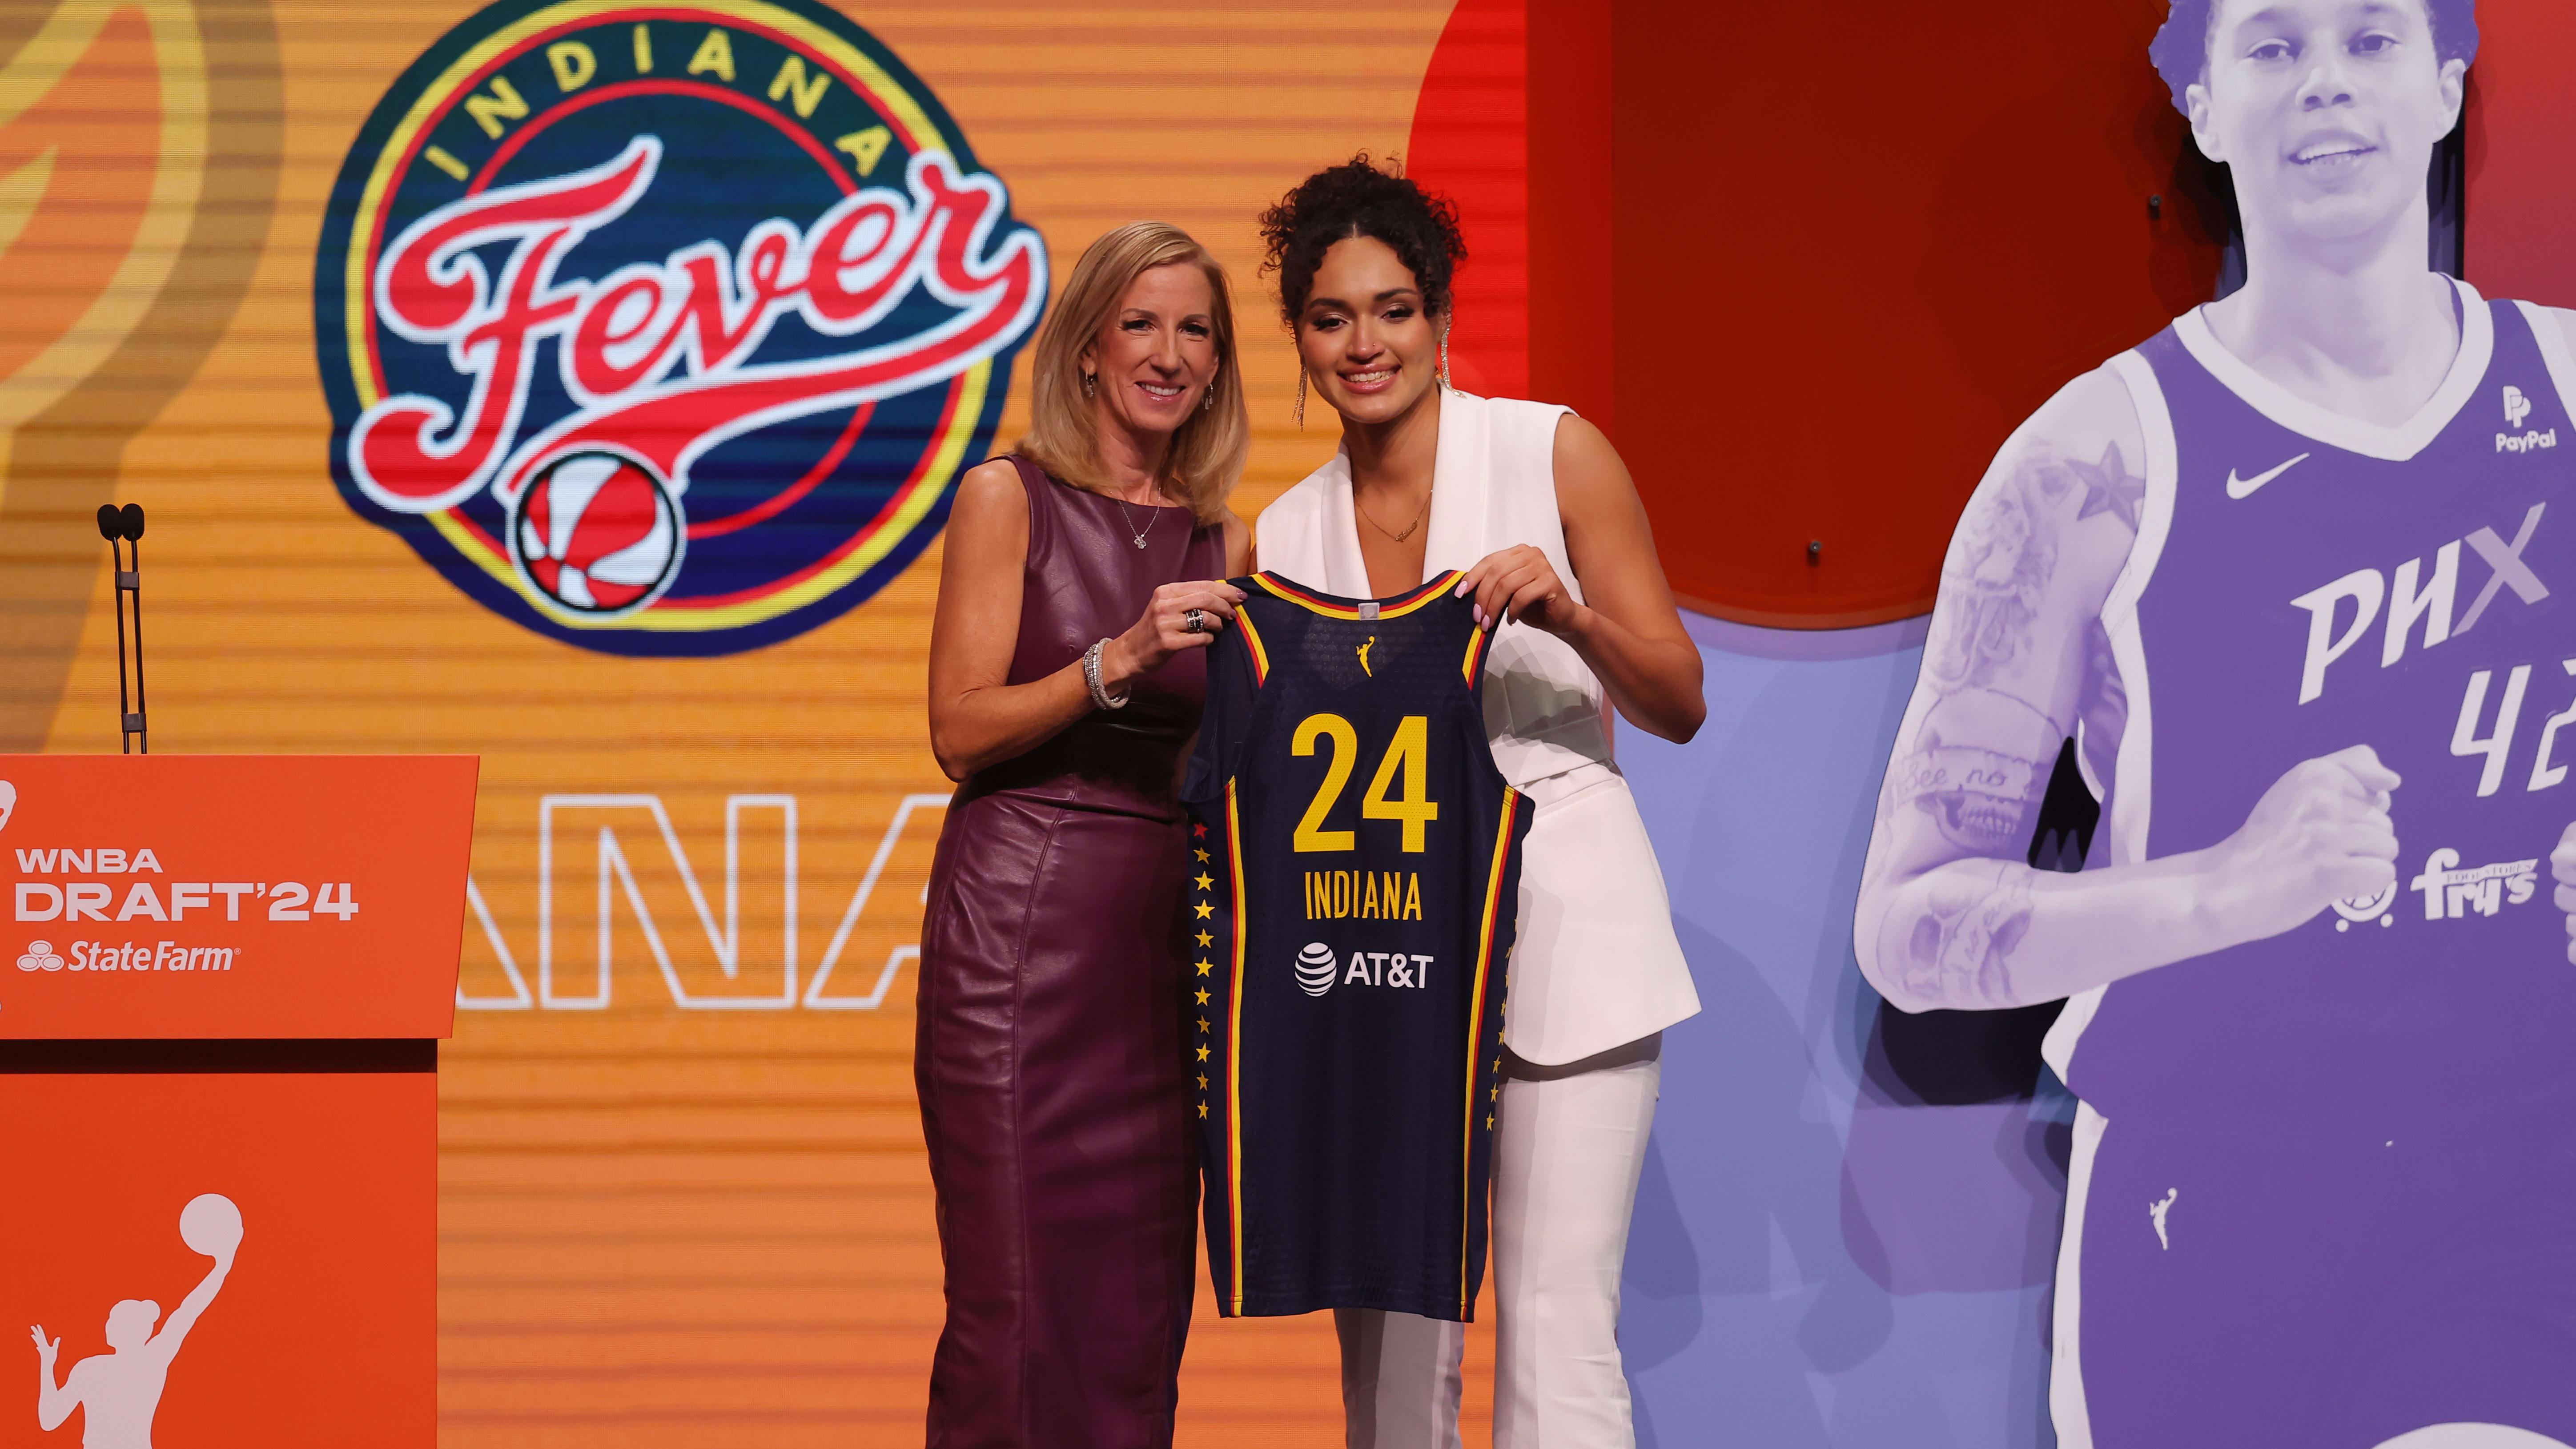 Celeste Taylor drafted 15th in WNBA to Indiana Fever, Exciting Debut Ahead